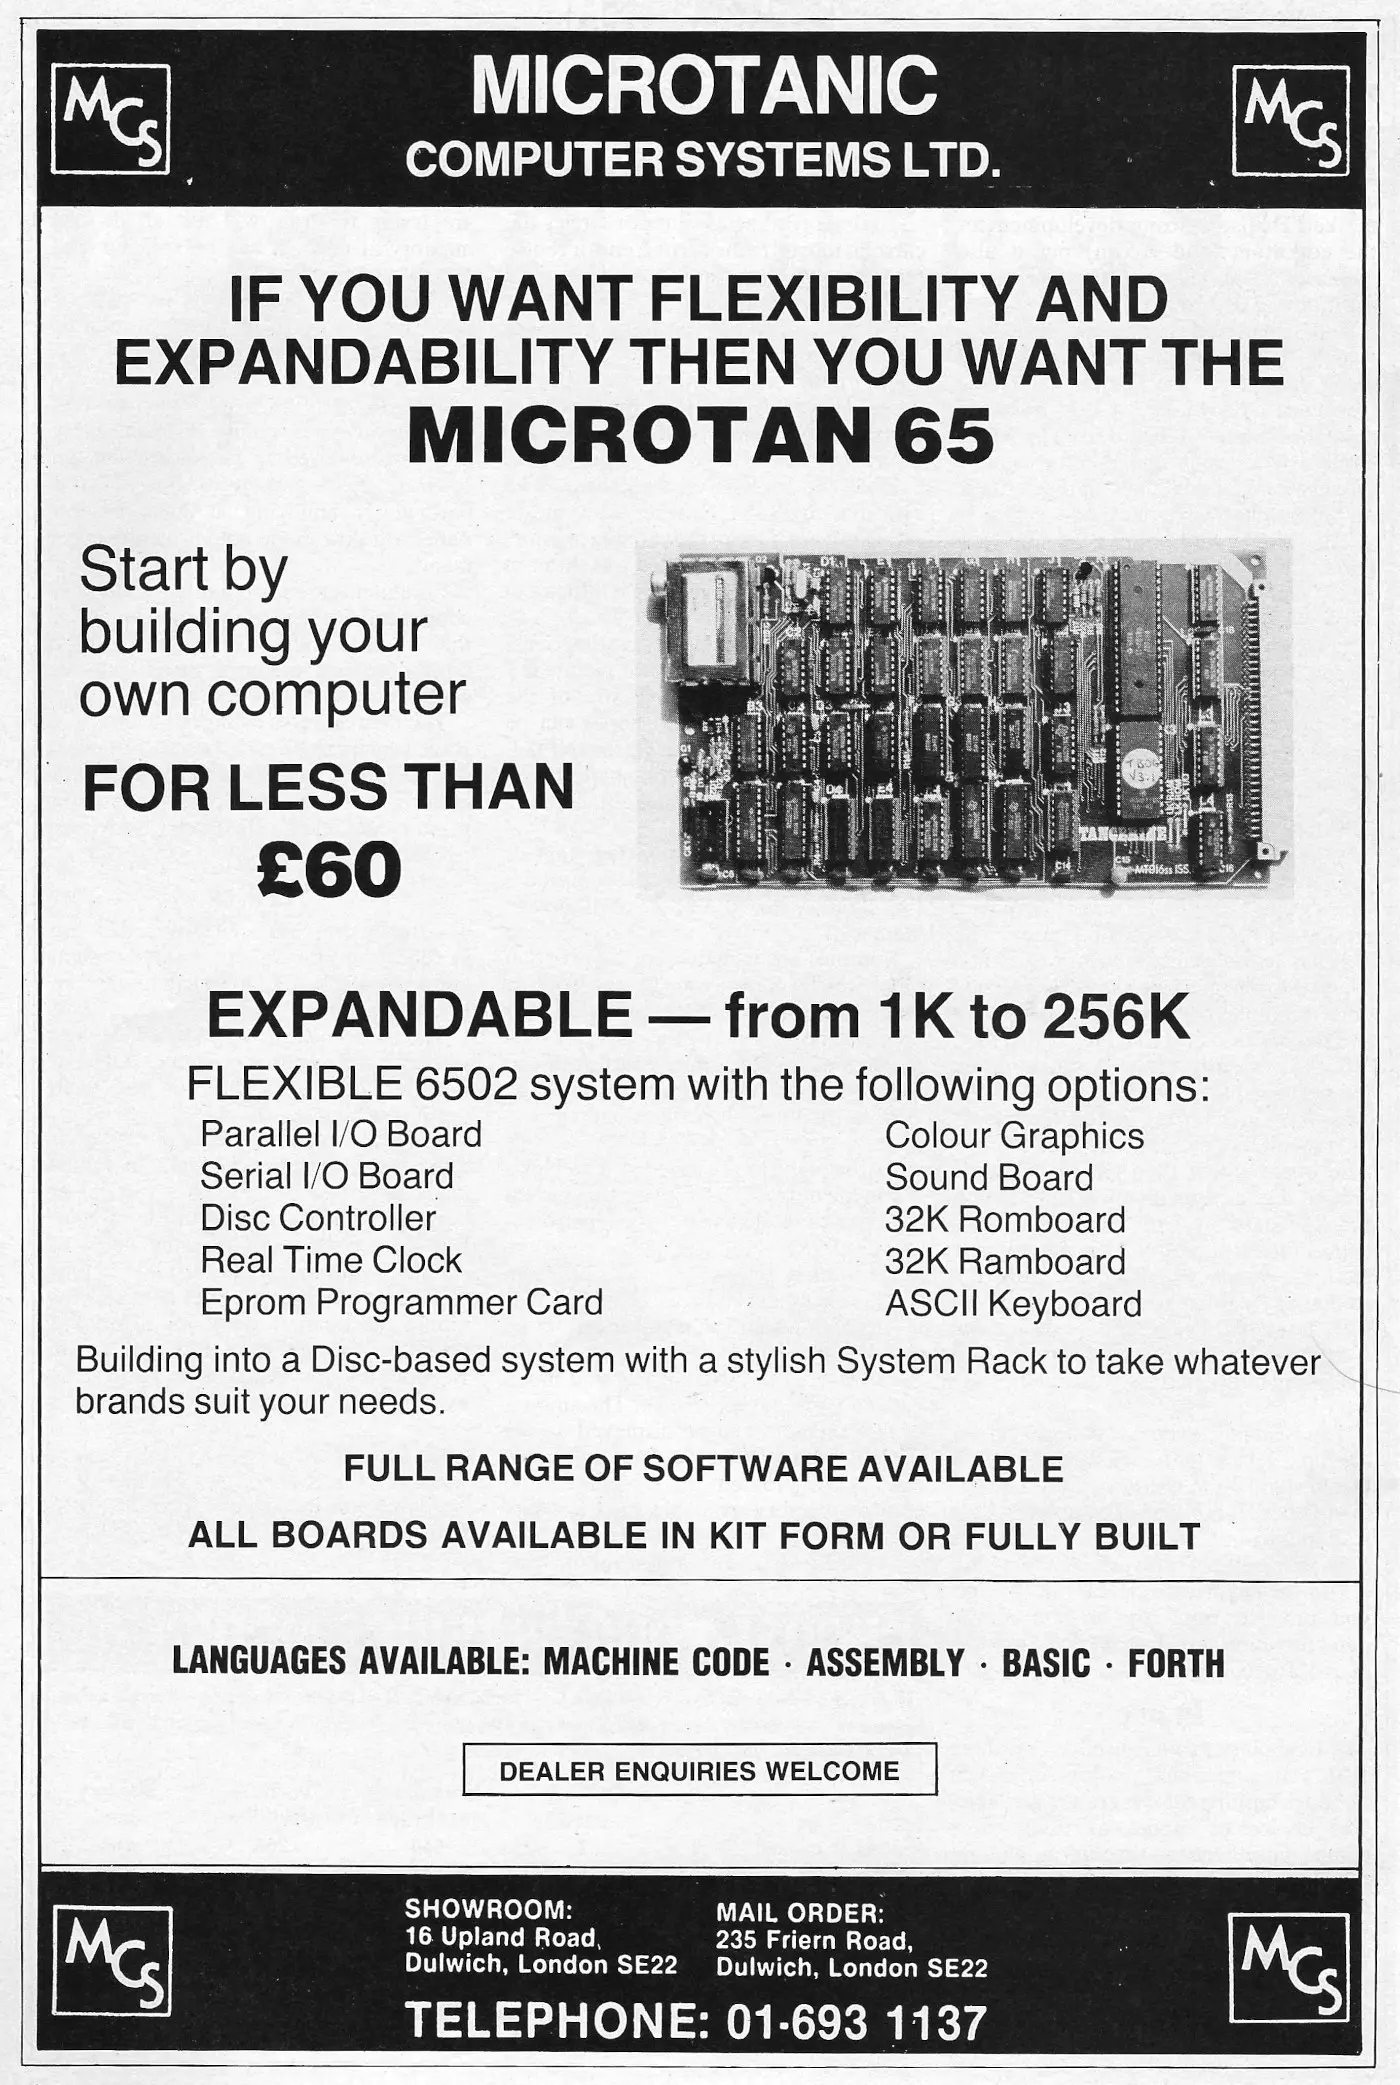 Microtanic Advert: <b>If you want flexibility and expandability, then you want the Microtan 65</b>, from Personal Computer News, 1st September 1983